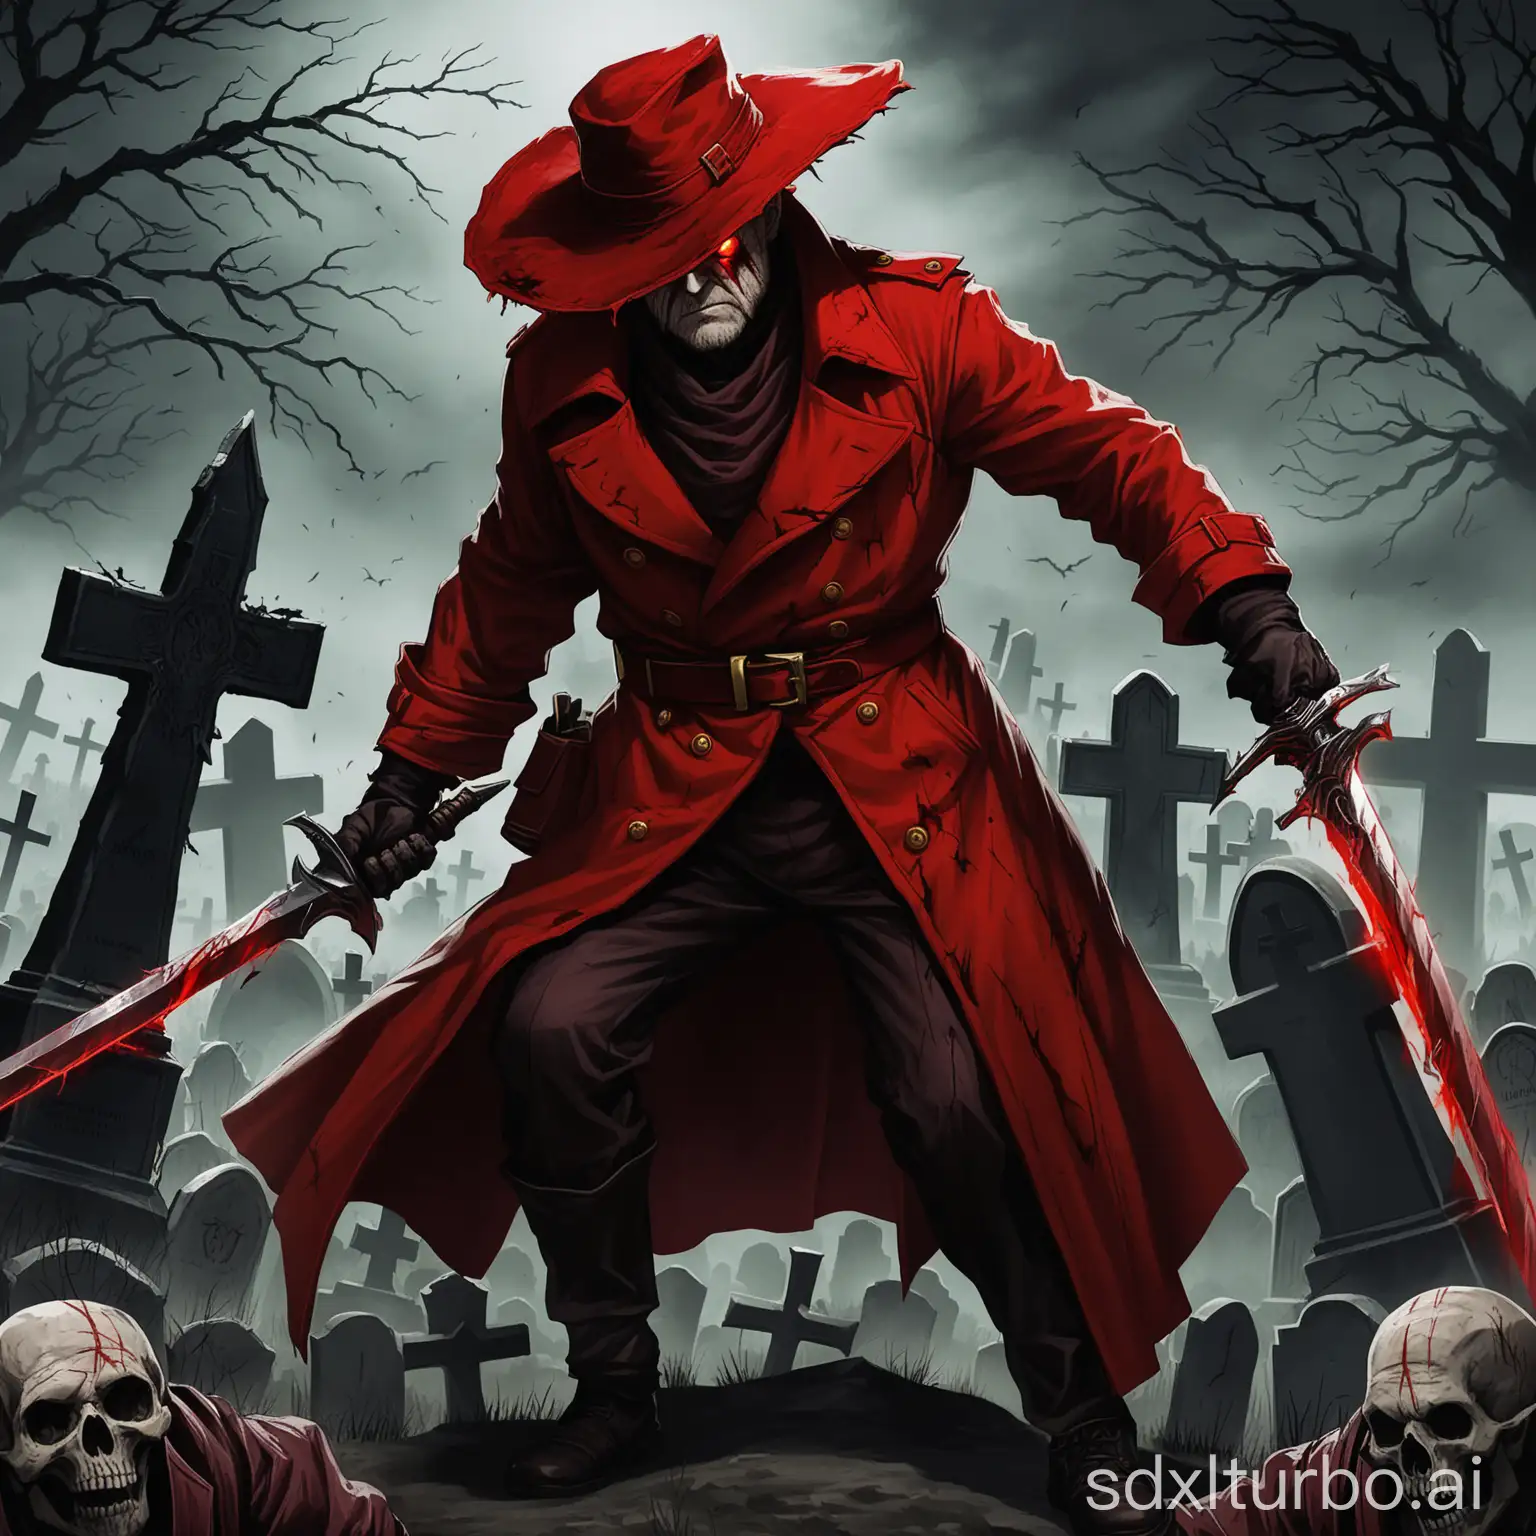 Mysterious-Blood-Hunter-Dueling-with-DoubleSabre-in-Graveyard